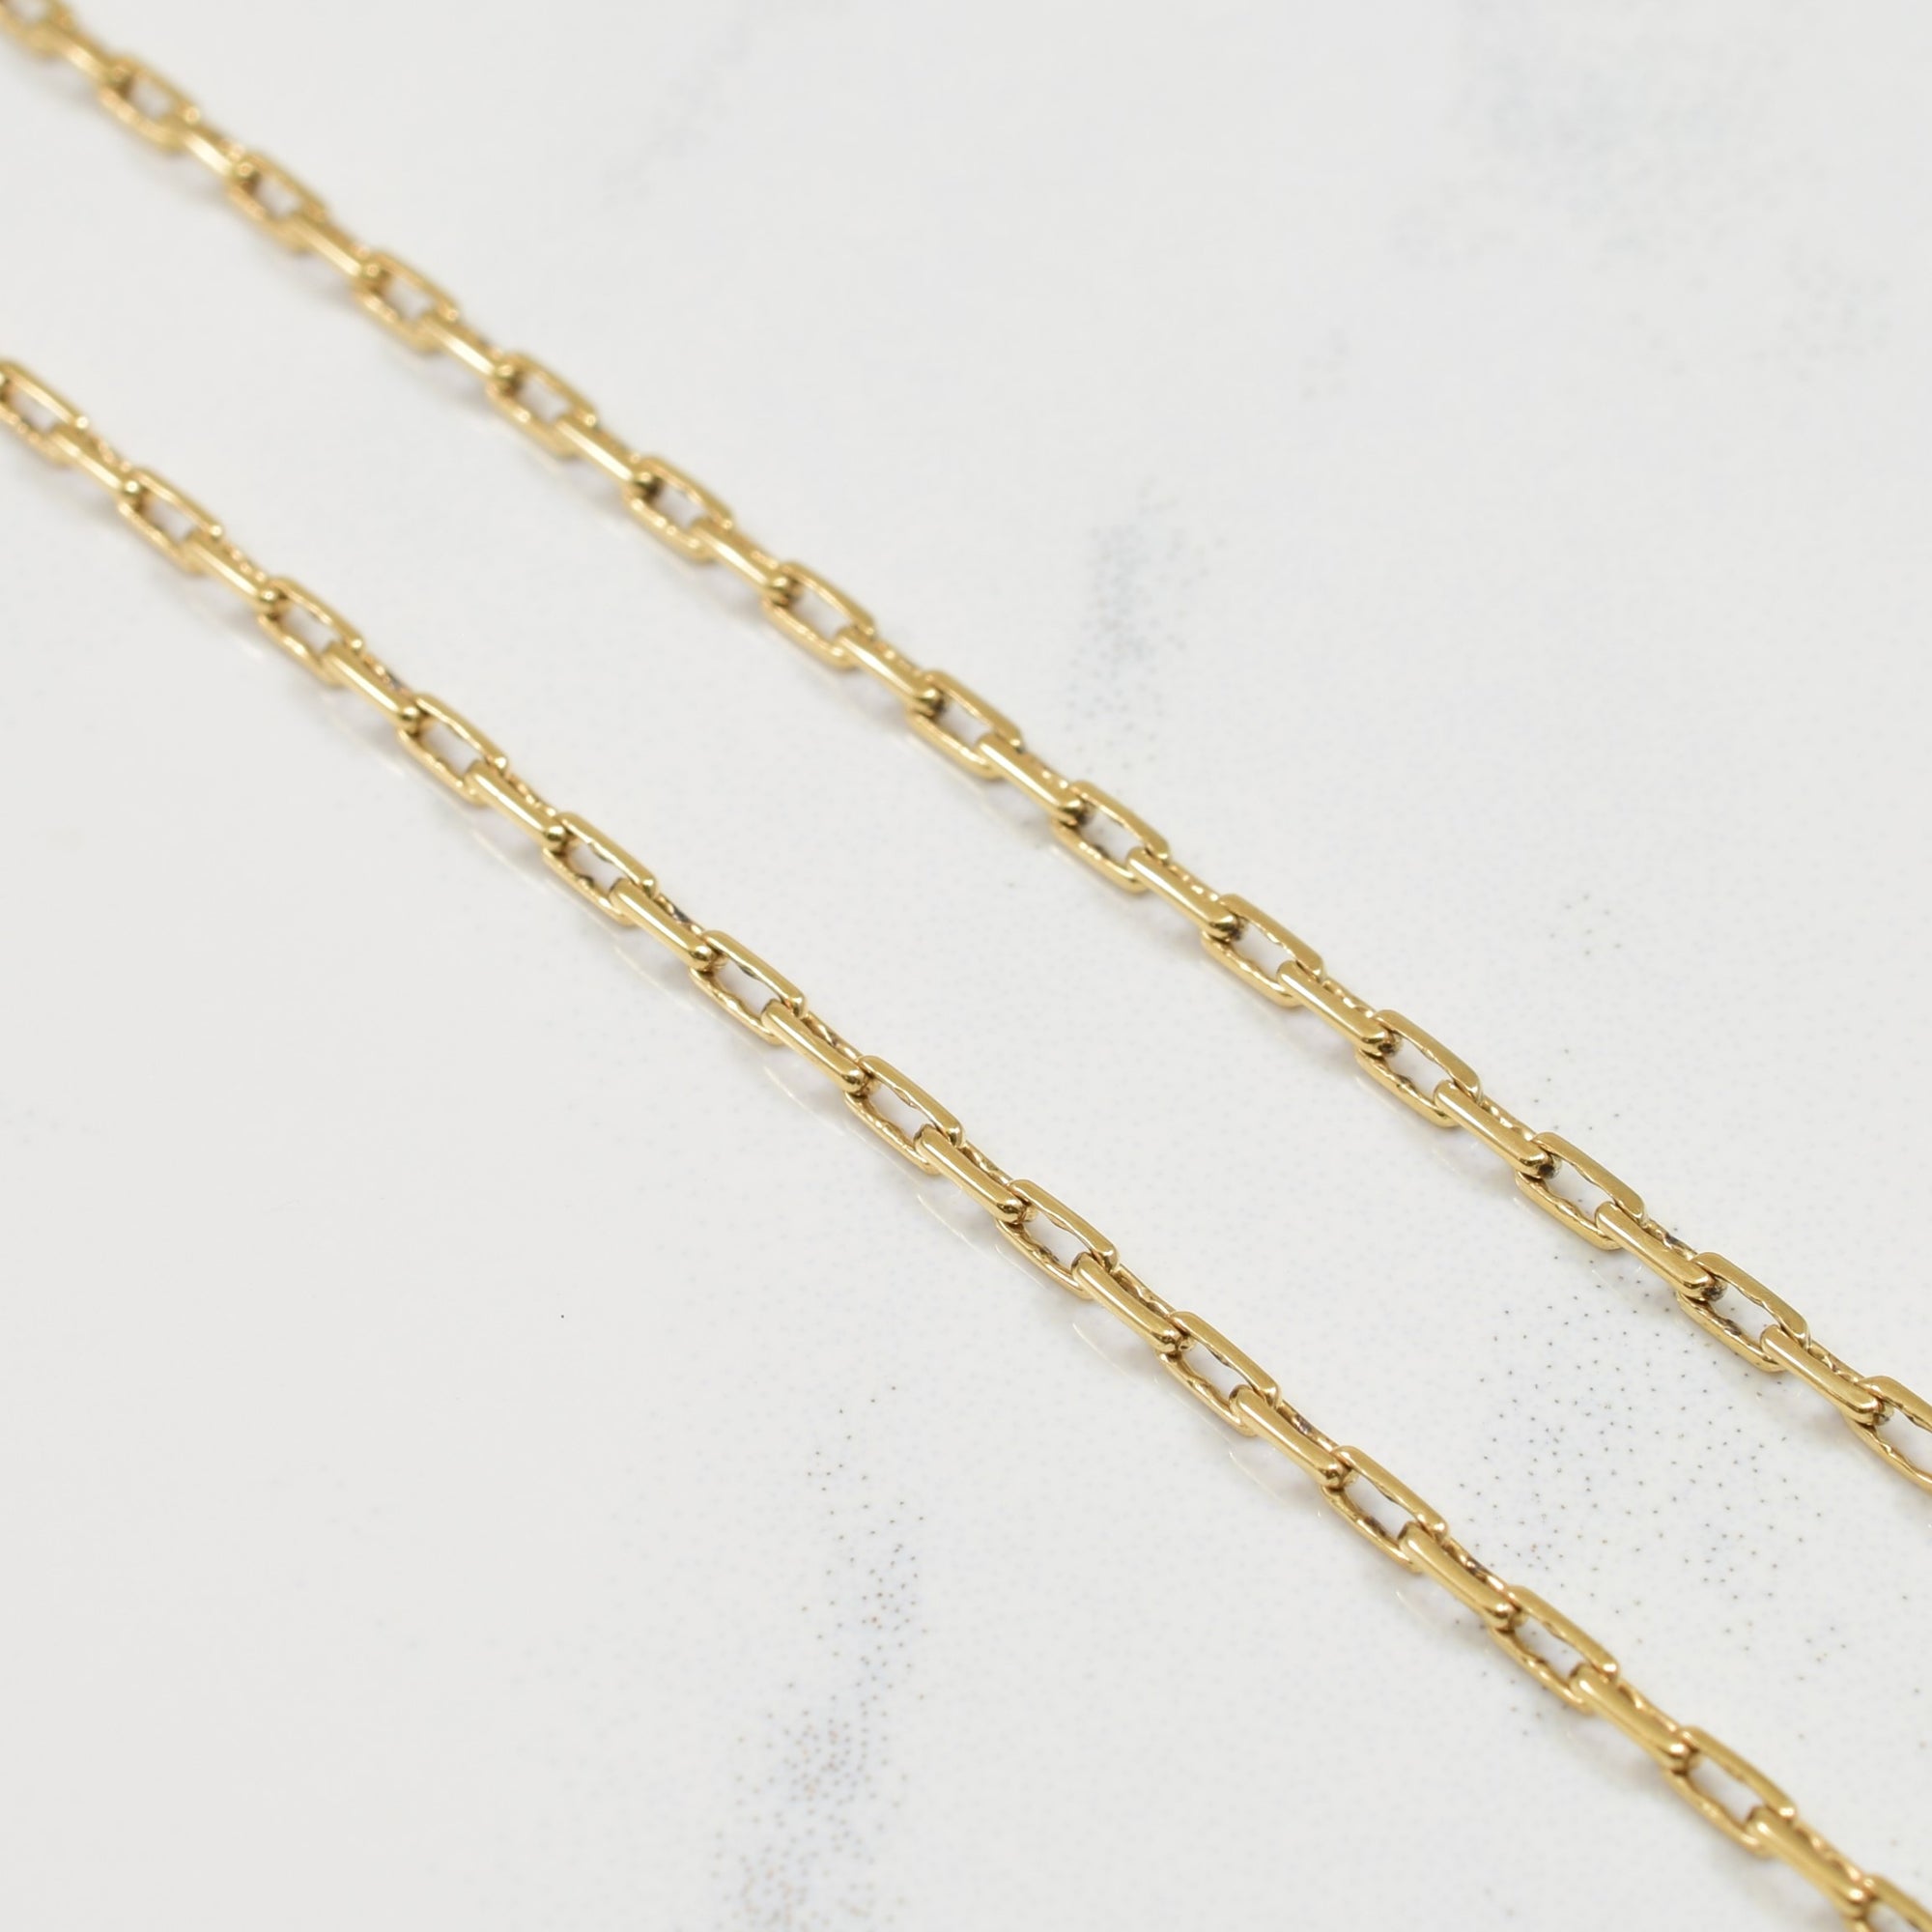 10k Yellow Gold Elongated Cable Chain | 27